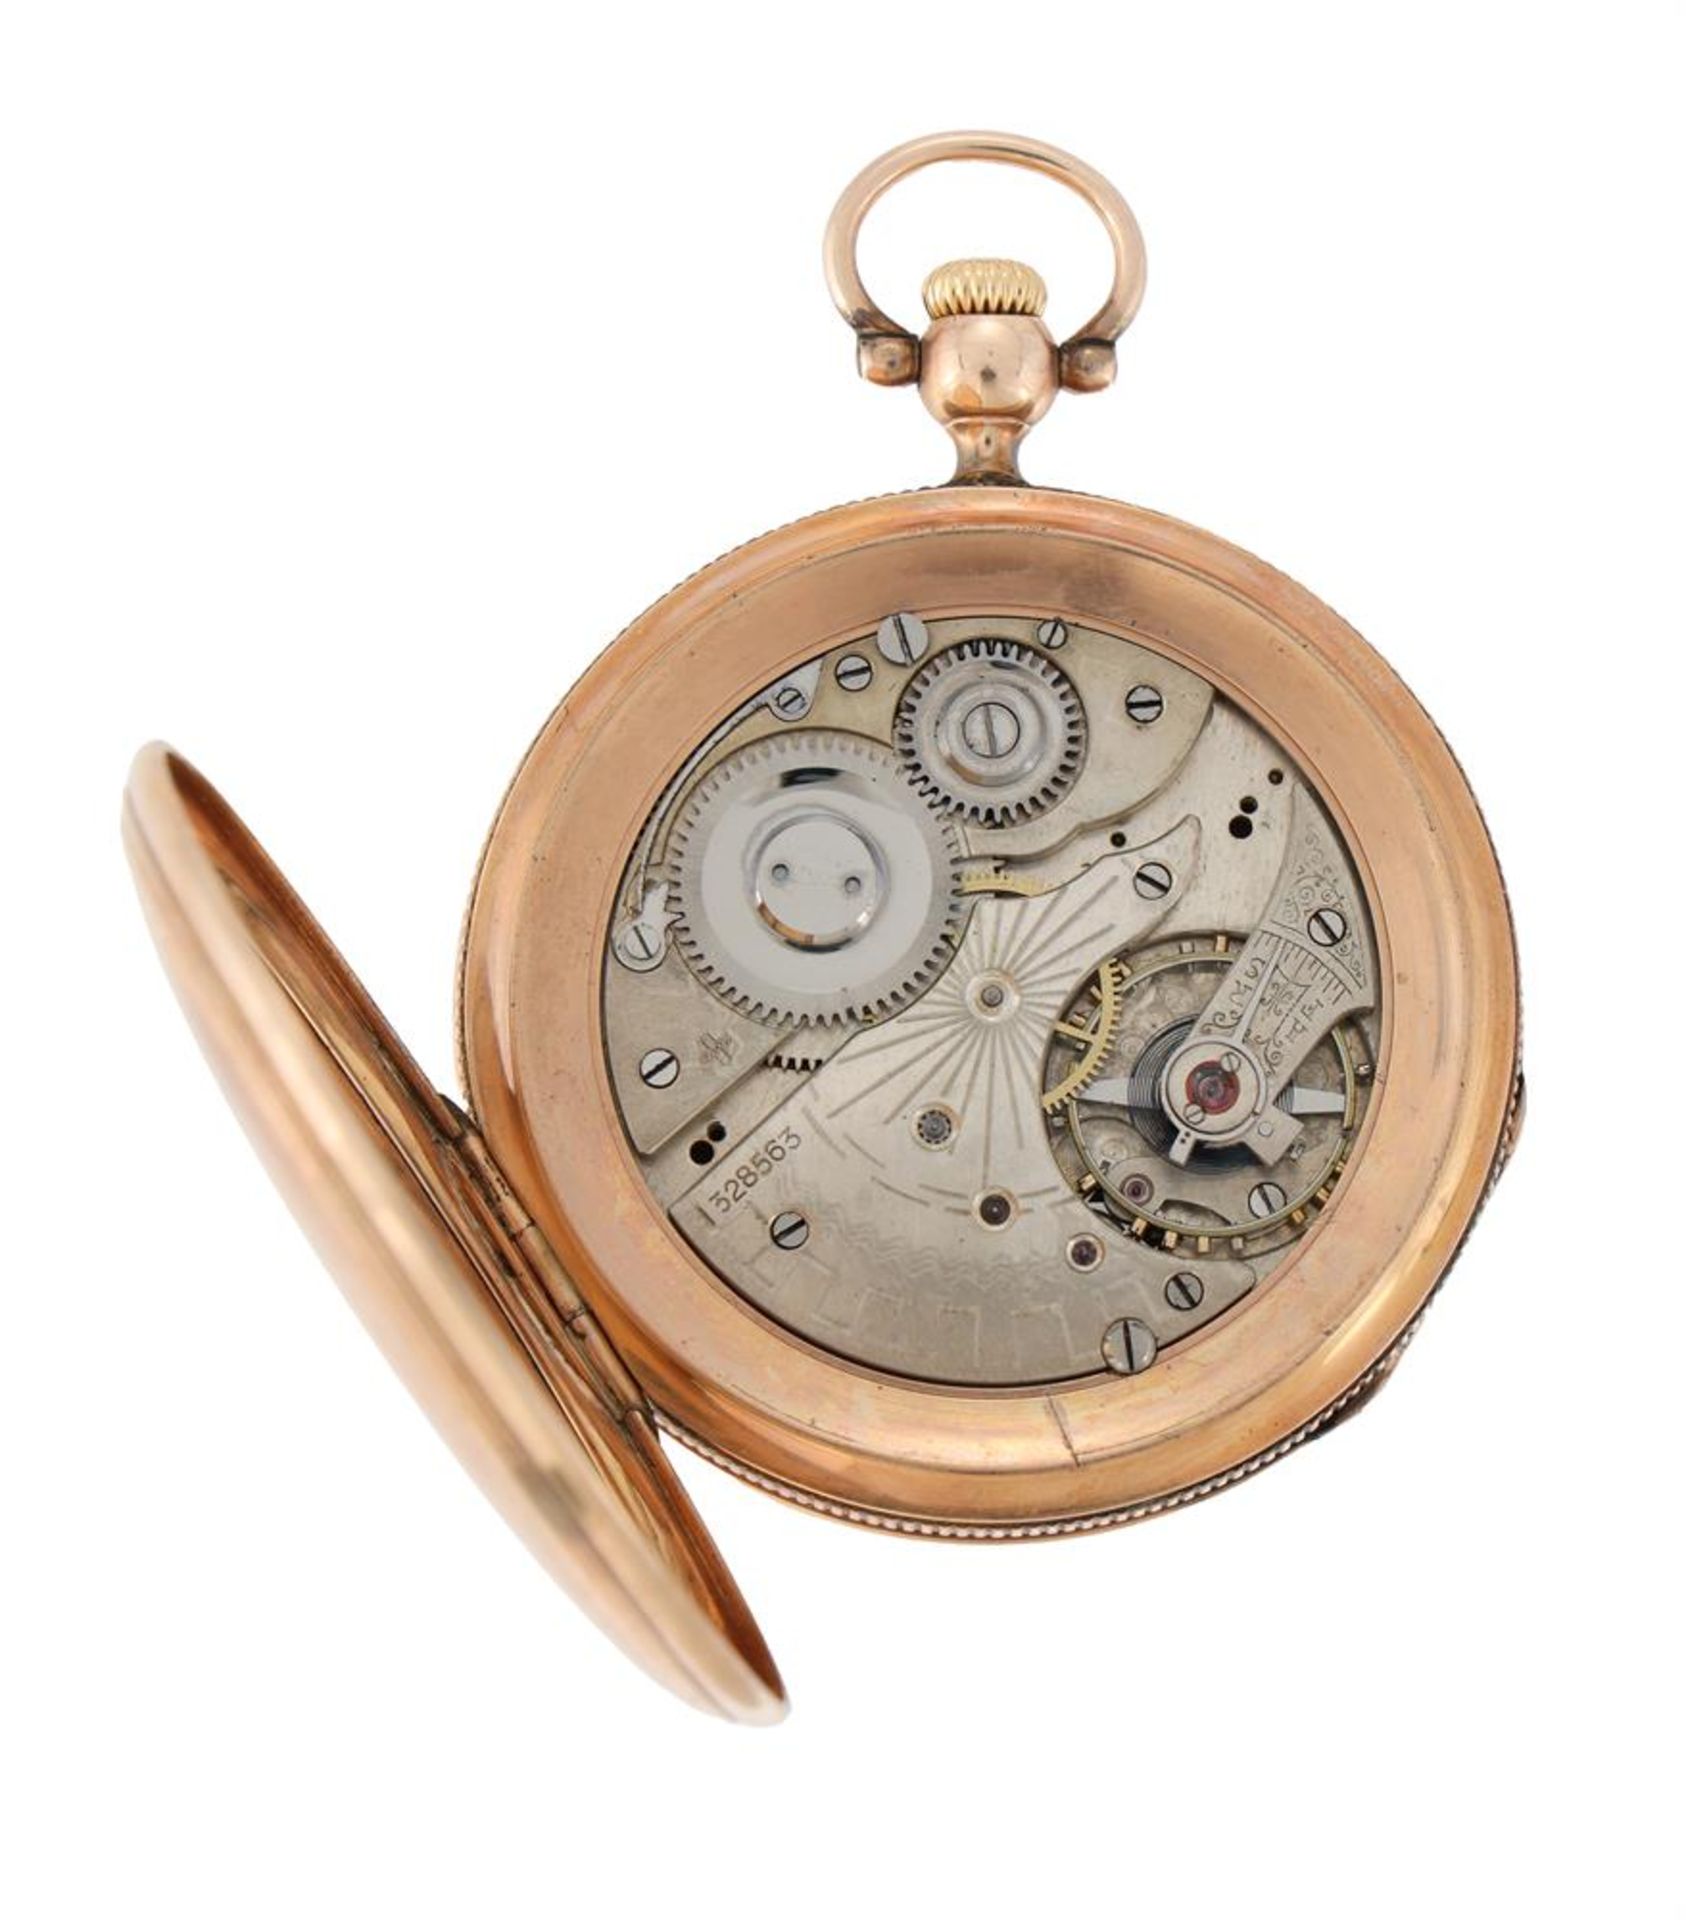 UNSIGNED, A GOLD KEYLESS WIND OPEN FACE POCKET WATCH - Image 2 of 2